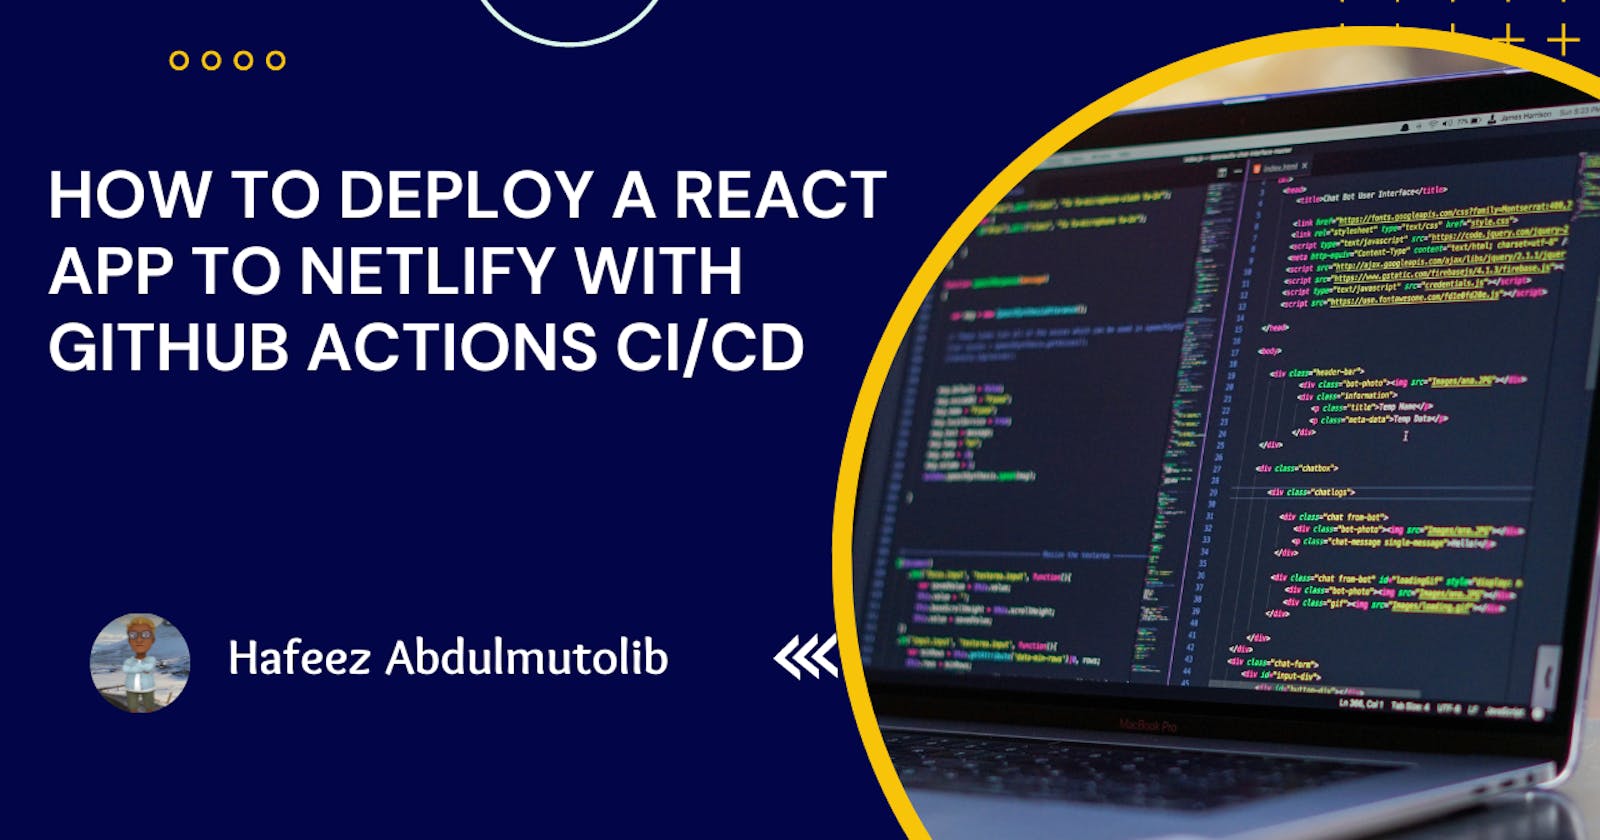 How to Deploy a React App to Netlify with GitHub Actions CI/CD